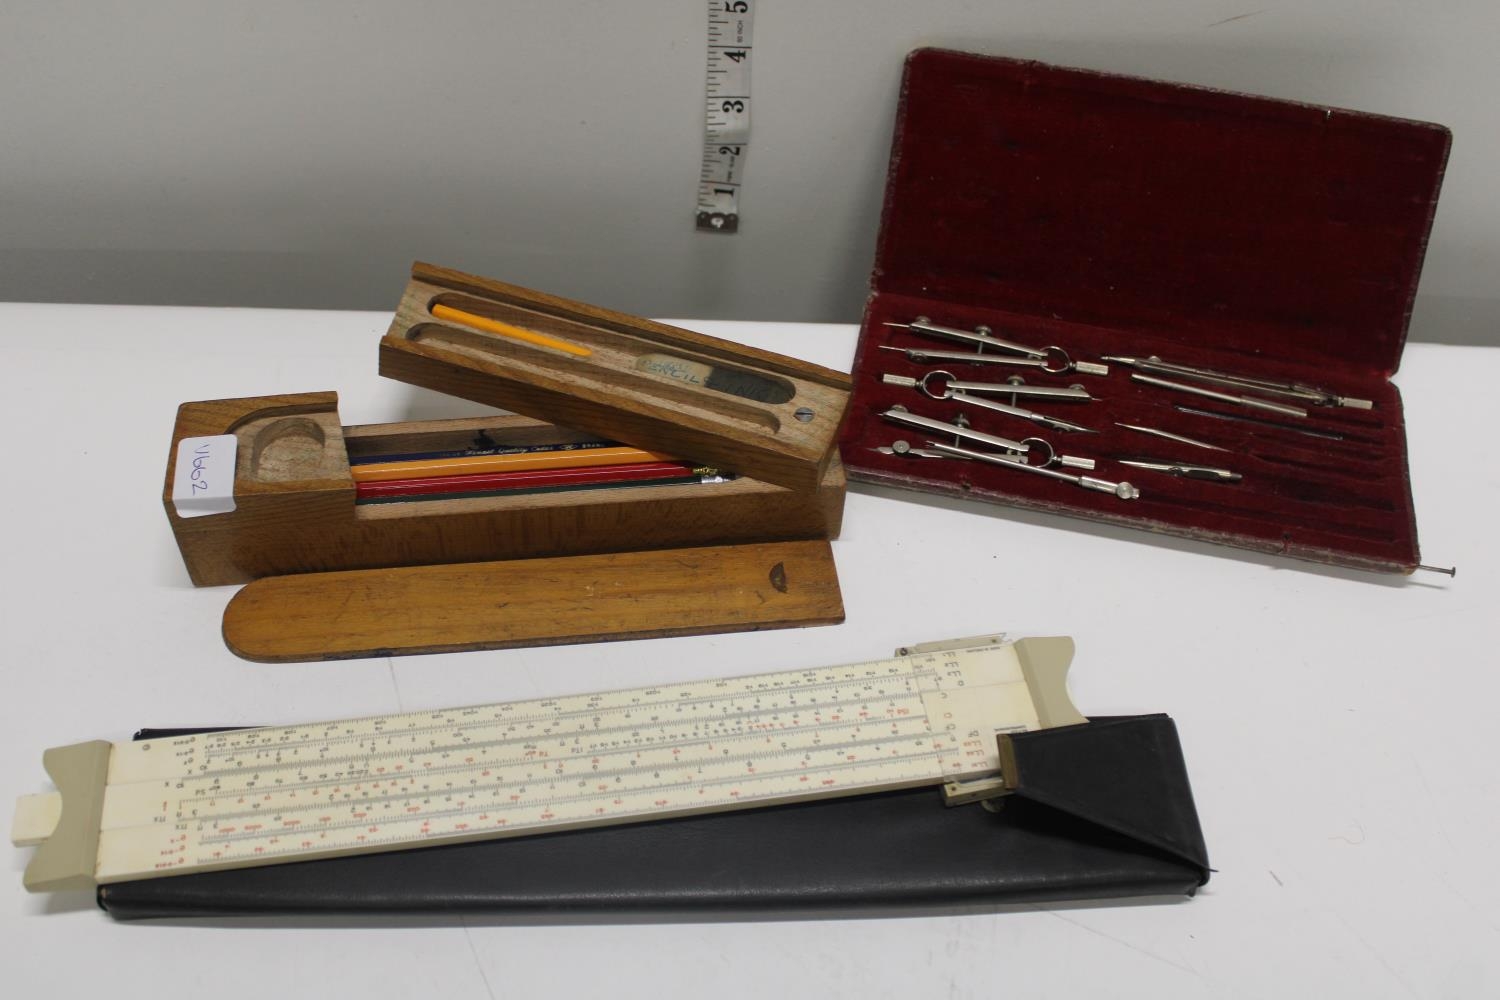 A vintage wooden pencil case & technical drawing instruments